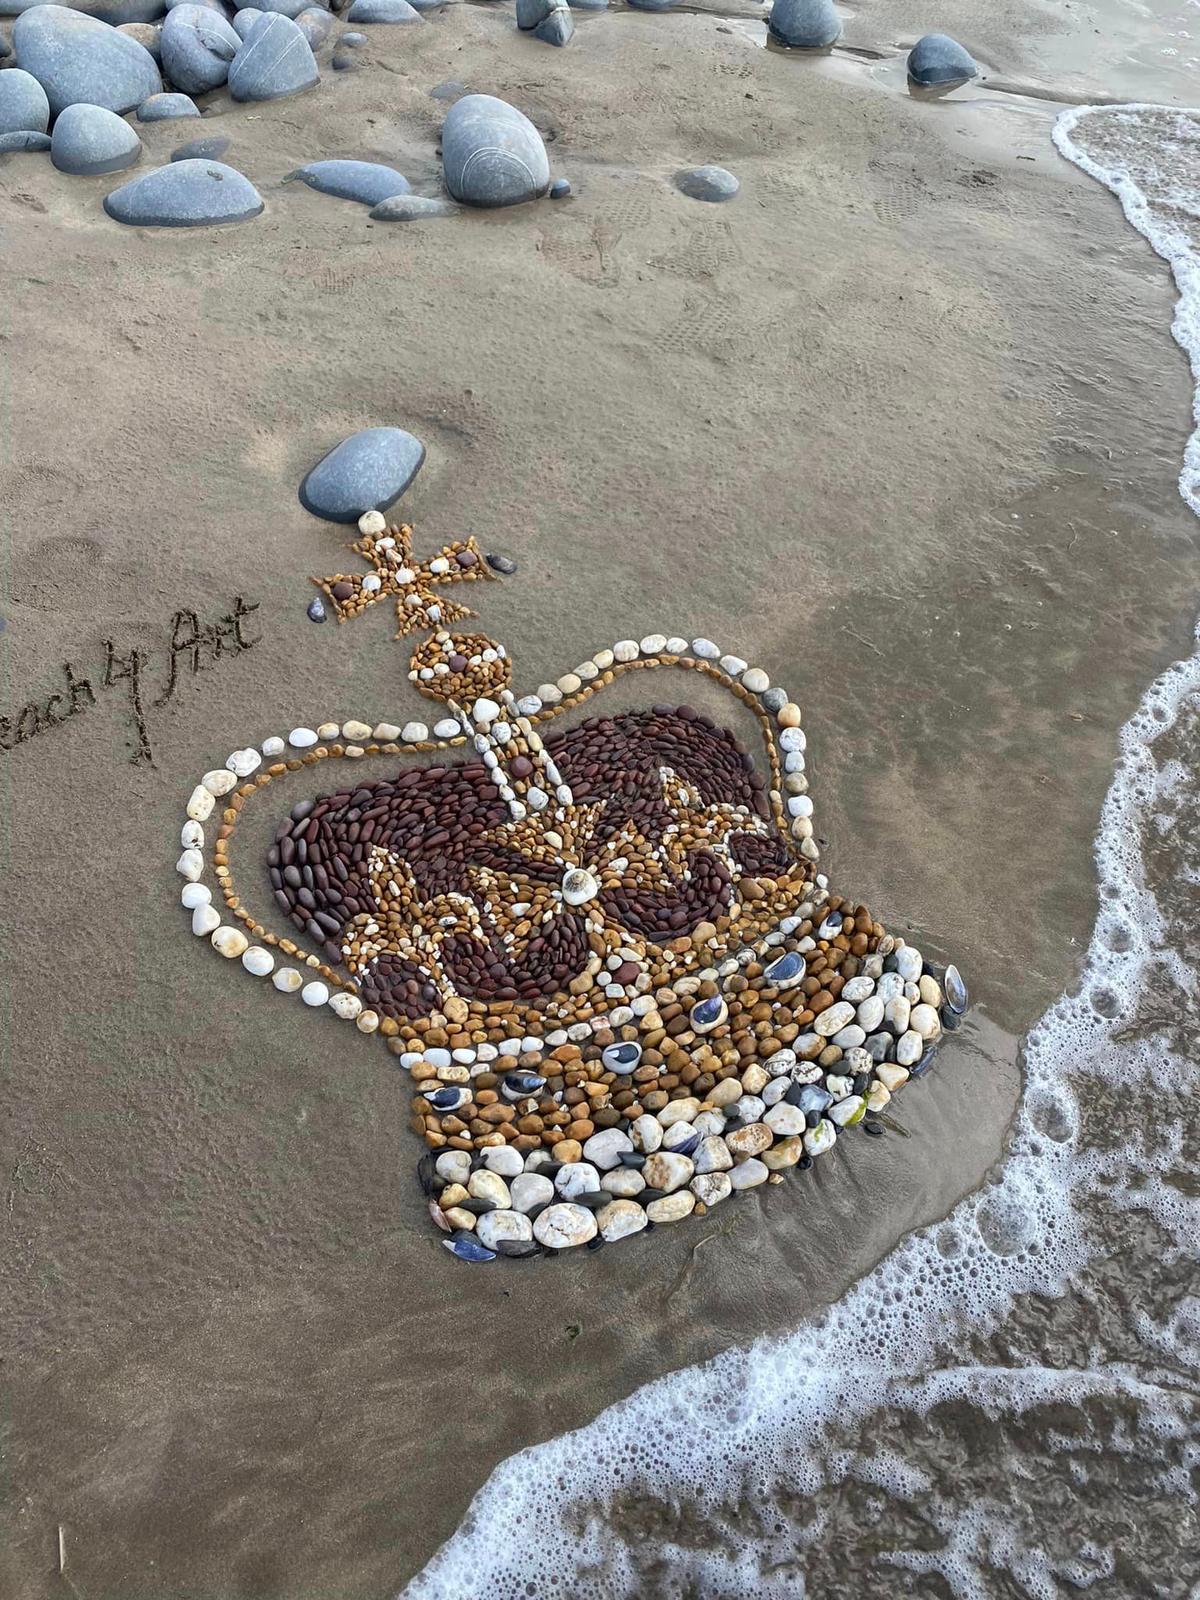 Tribute to the late Queen Elizabeth II. (Courtesy of <a href="https://www.facebook.com/profile.php?id=100065379493149">Beach4Art</a>)